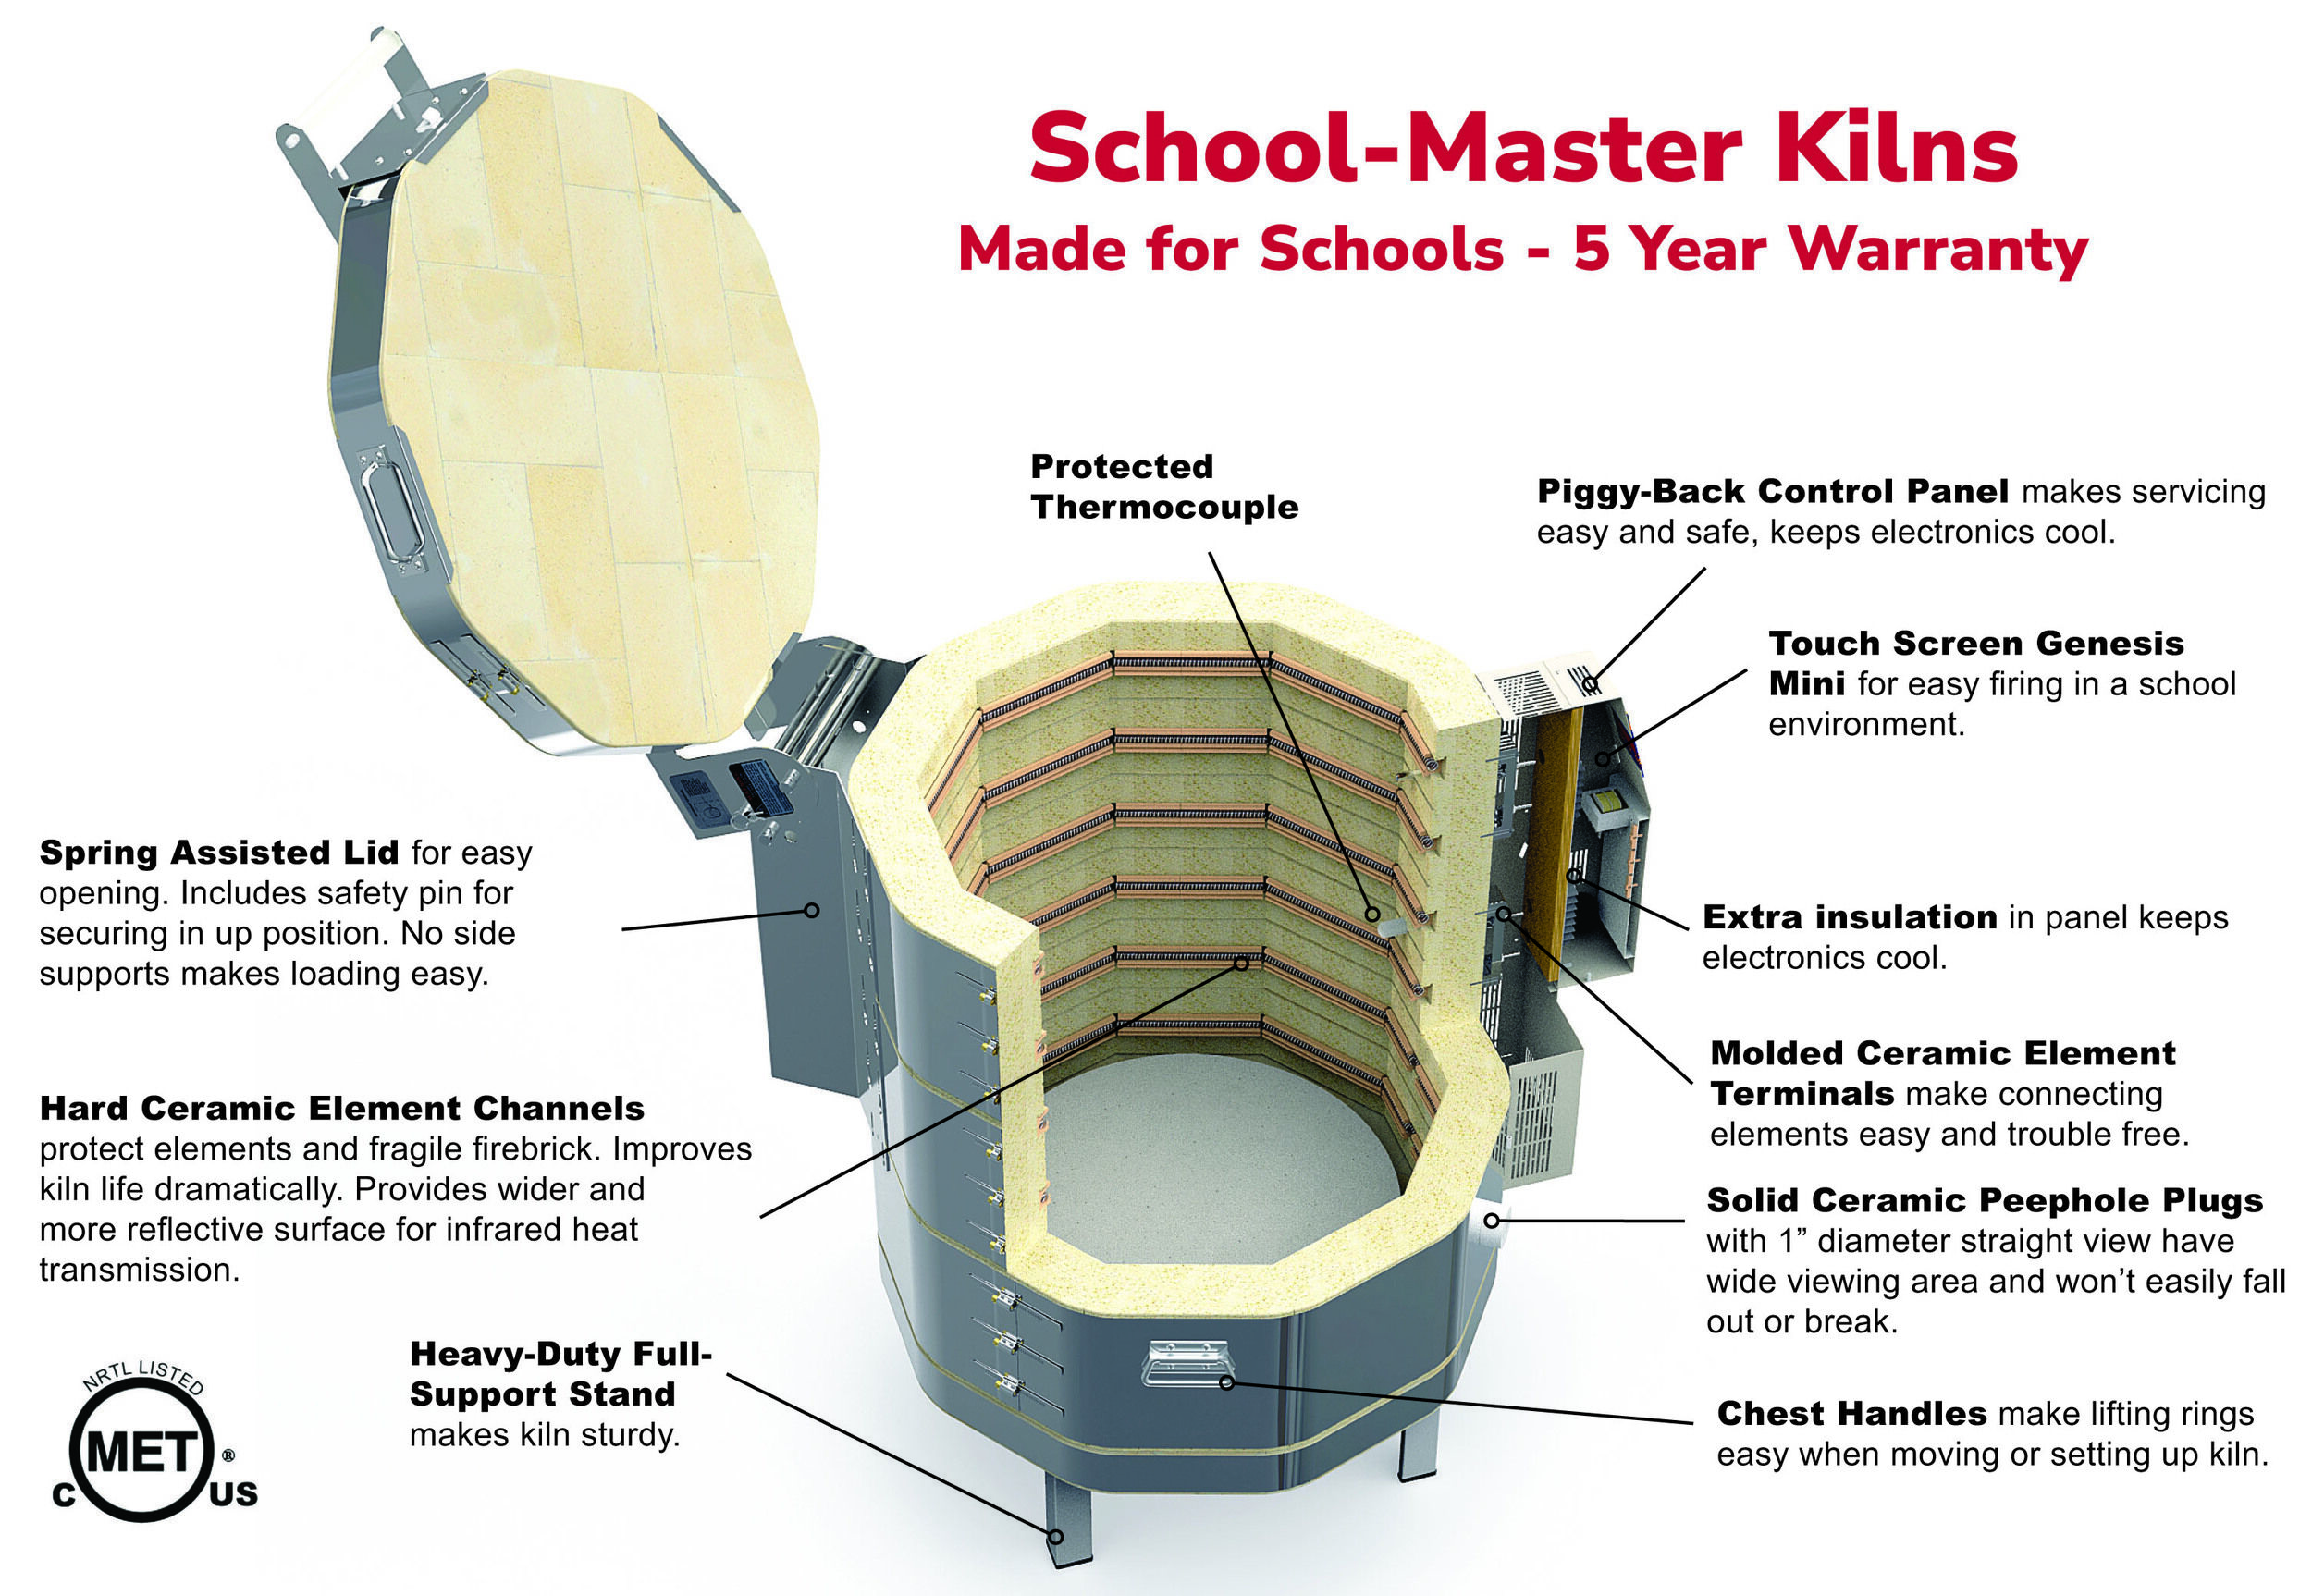 L&L School-Master Kiln made for K-12 schools with a five-year warranty, protected firebrick, safe lid design, intuitive easy-to-use control with preset firing schedules